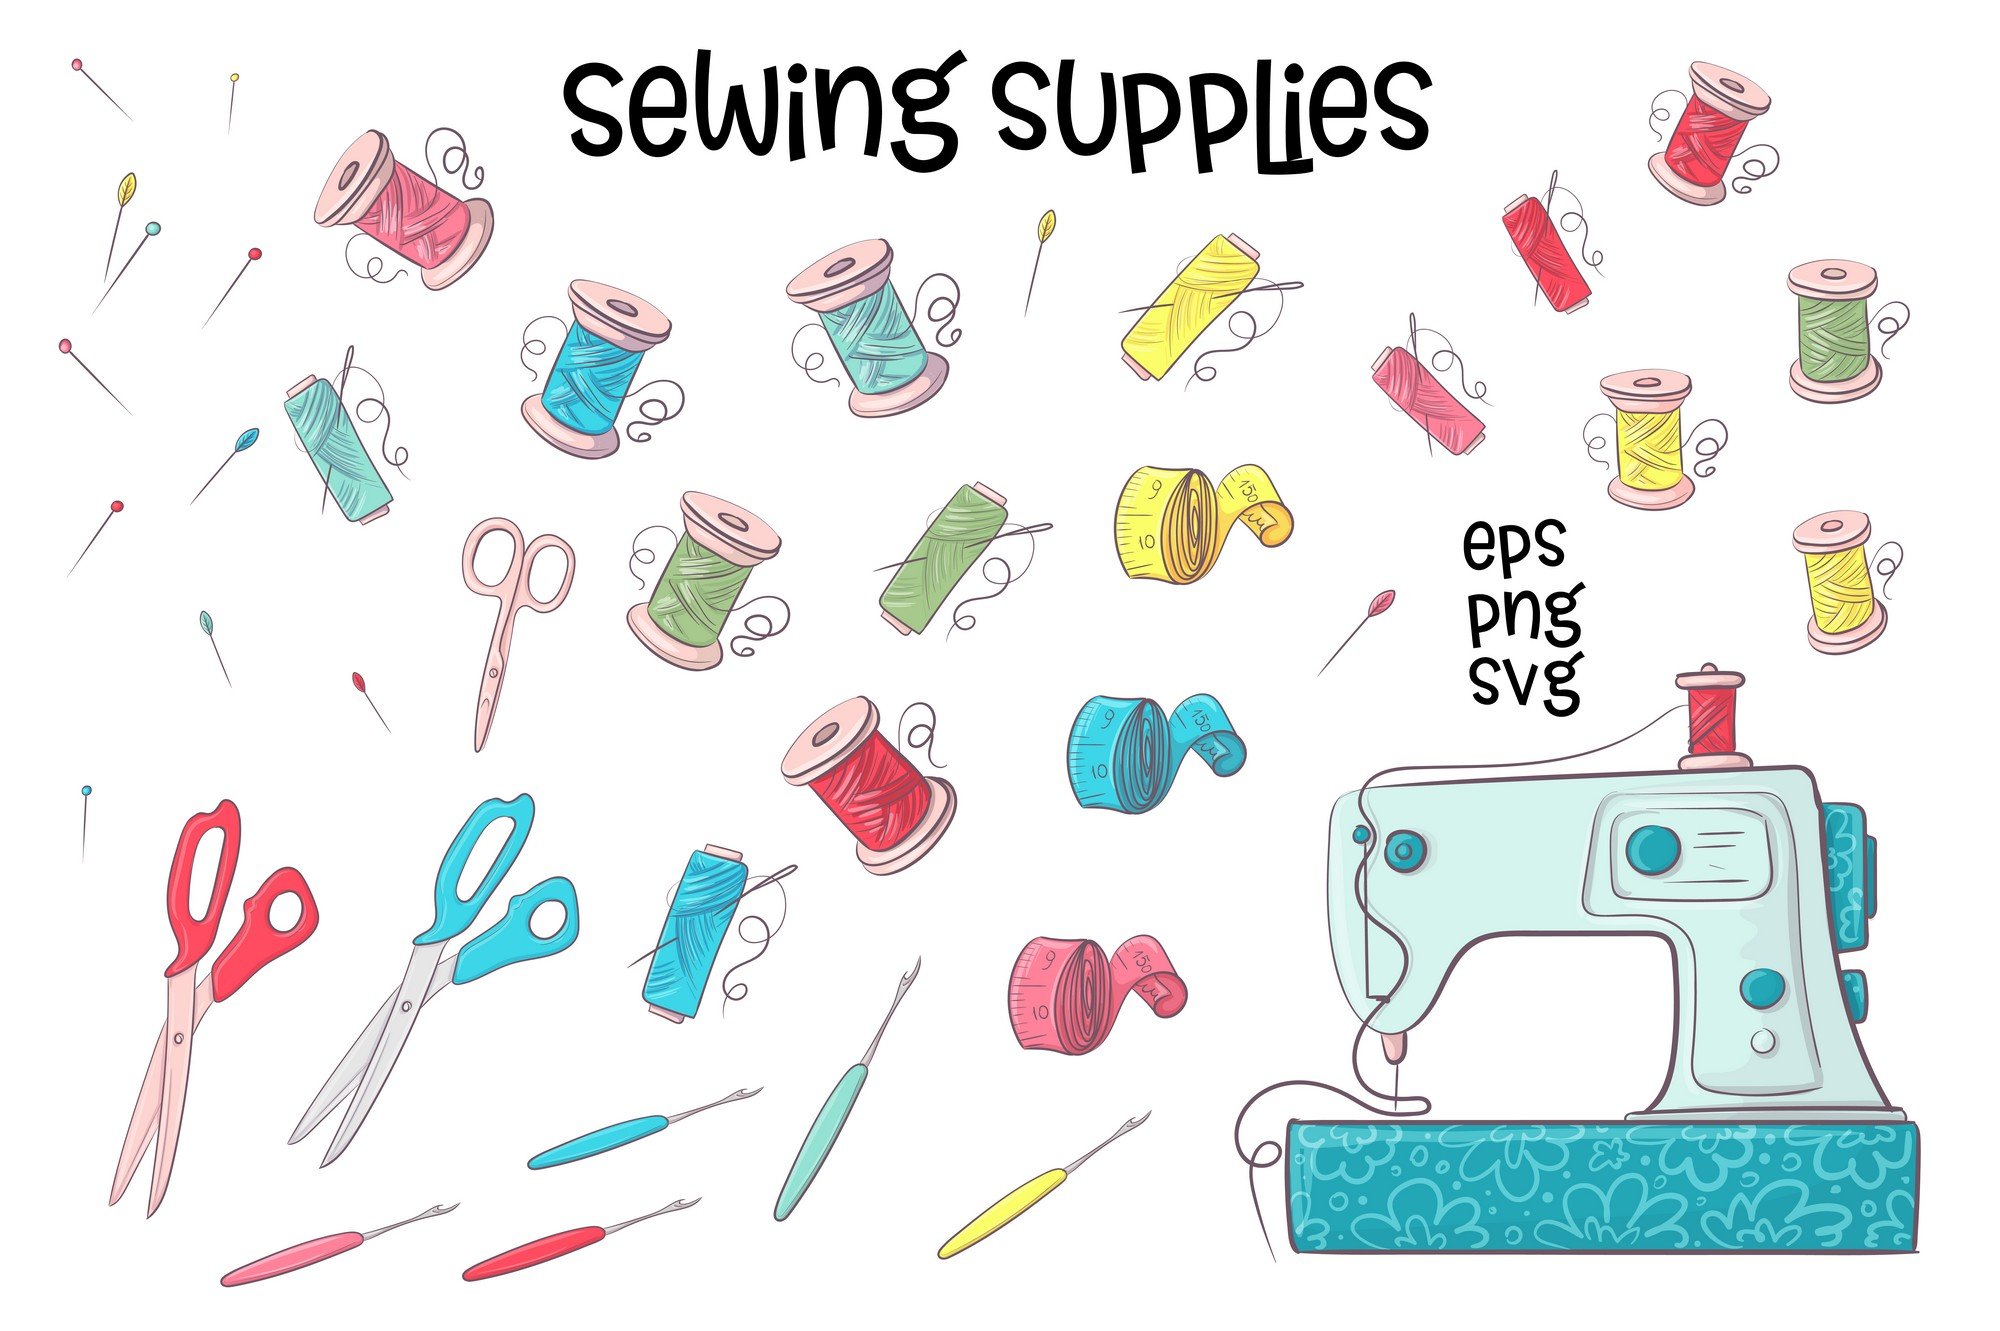 Sewing Clipart, Sewing Supplies Clip Art Pin Cushion Yarn Needle Thread  Spool String Button Cute Digital Graphic Design Small Commercial Use